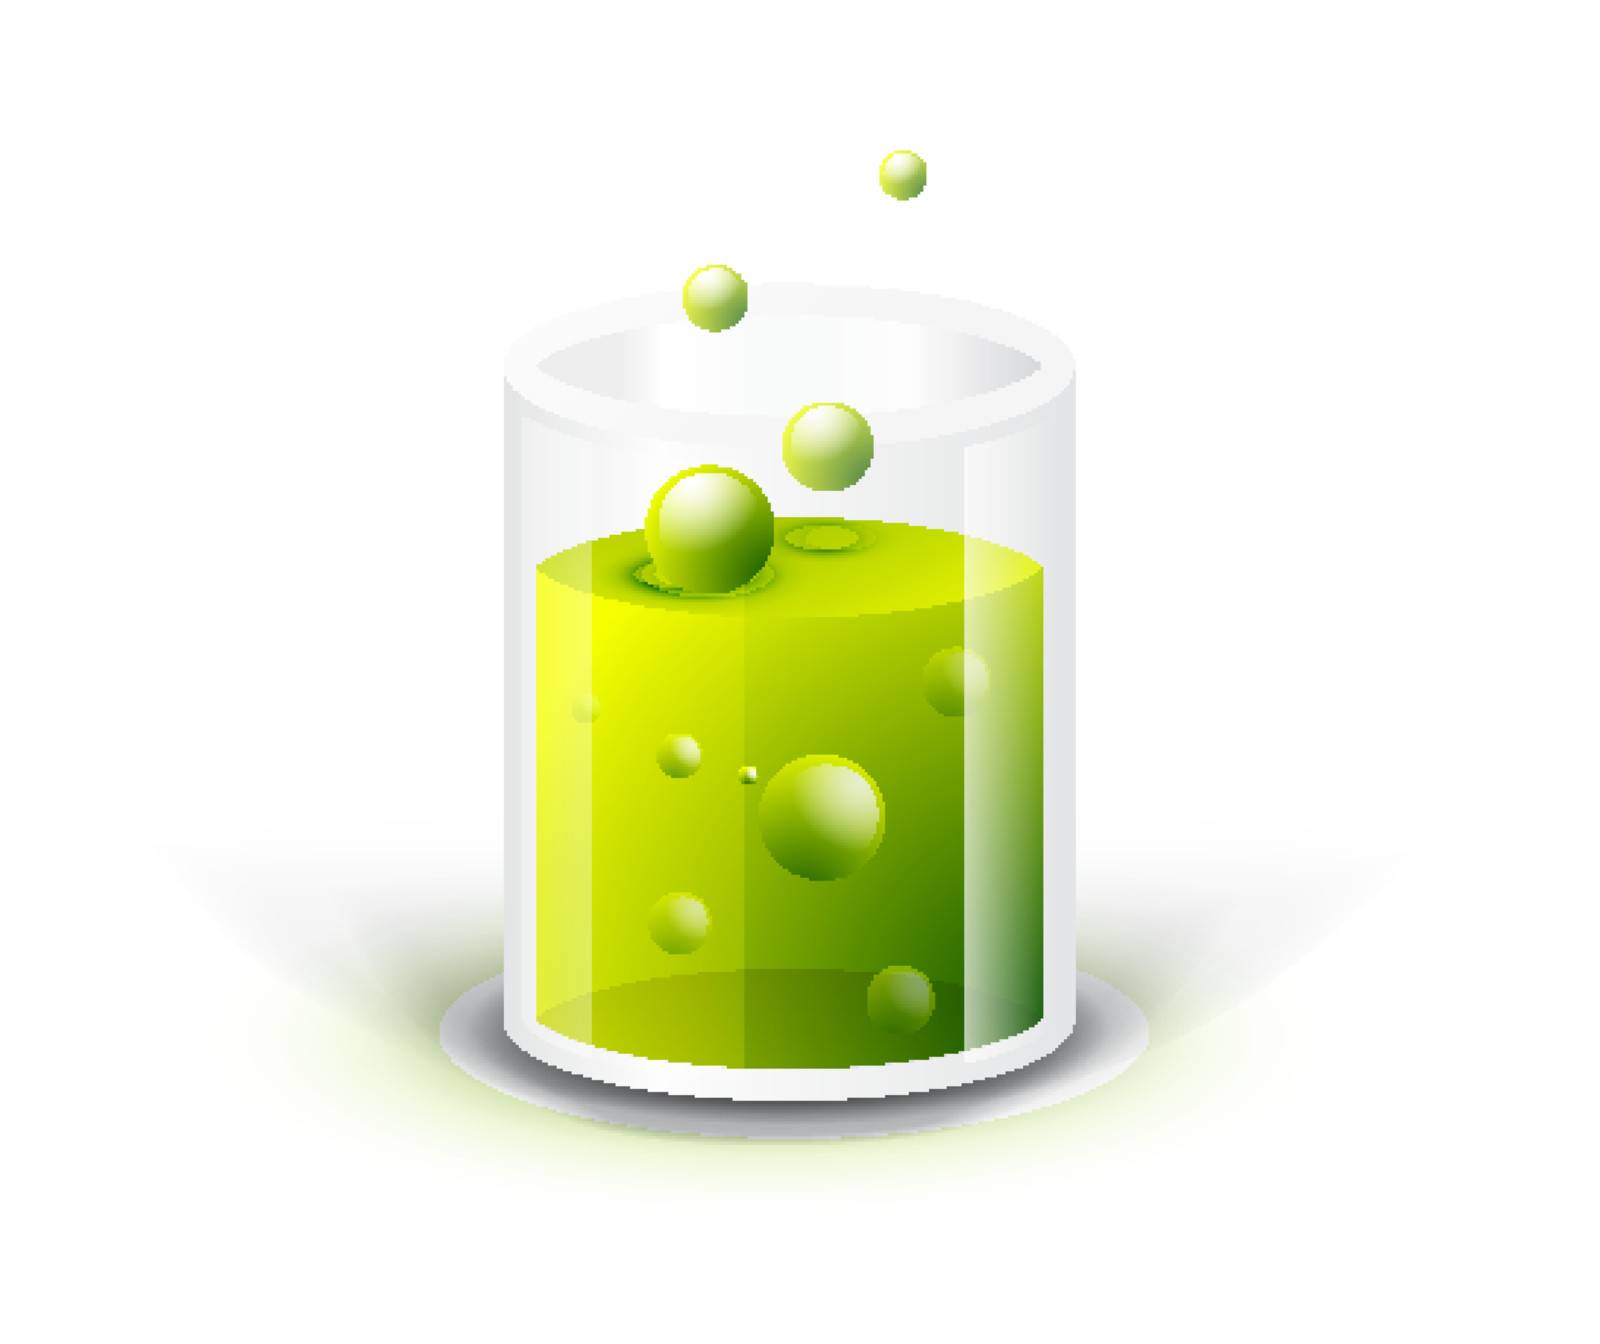 Glass vessel with green fluid. Chemistry concept illustration